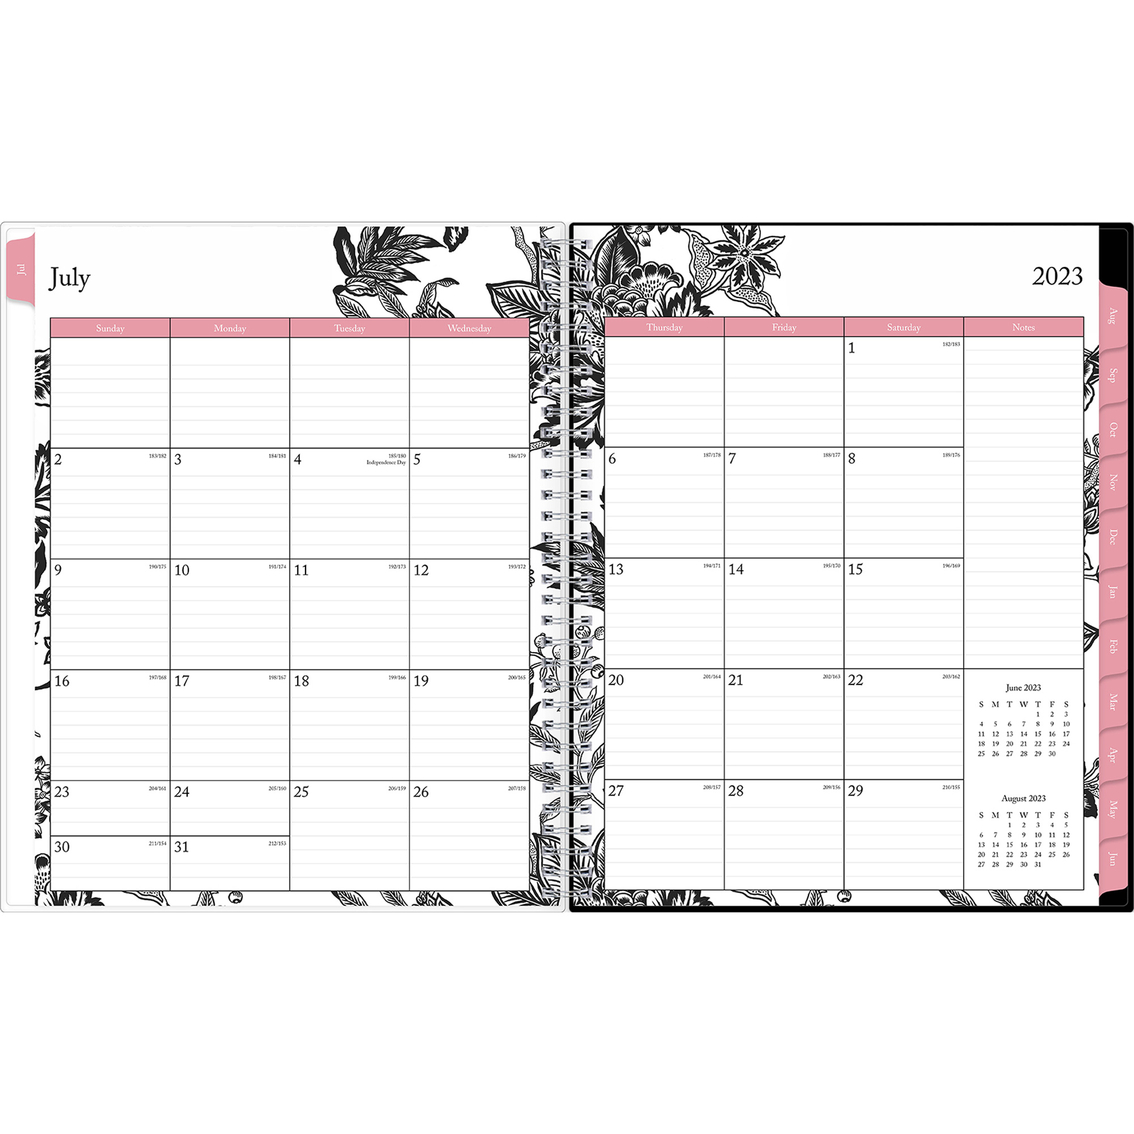 Blue Sky Analeis Create Your Own 8.5 in. x 11 in. Weekly and Monthly Planner - Image 2 of 3